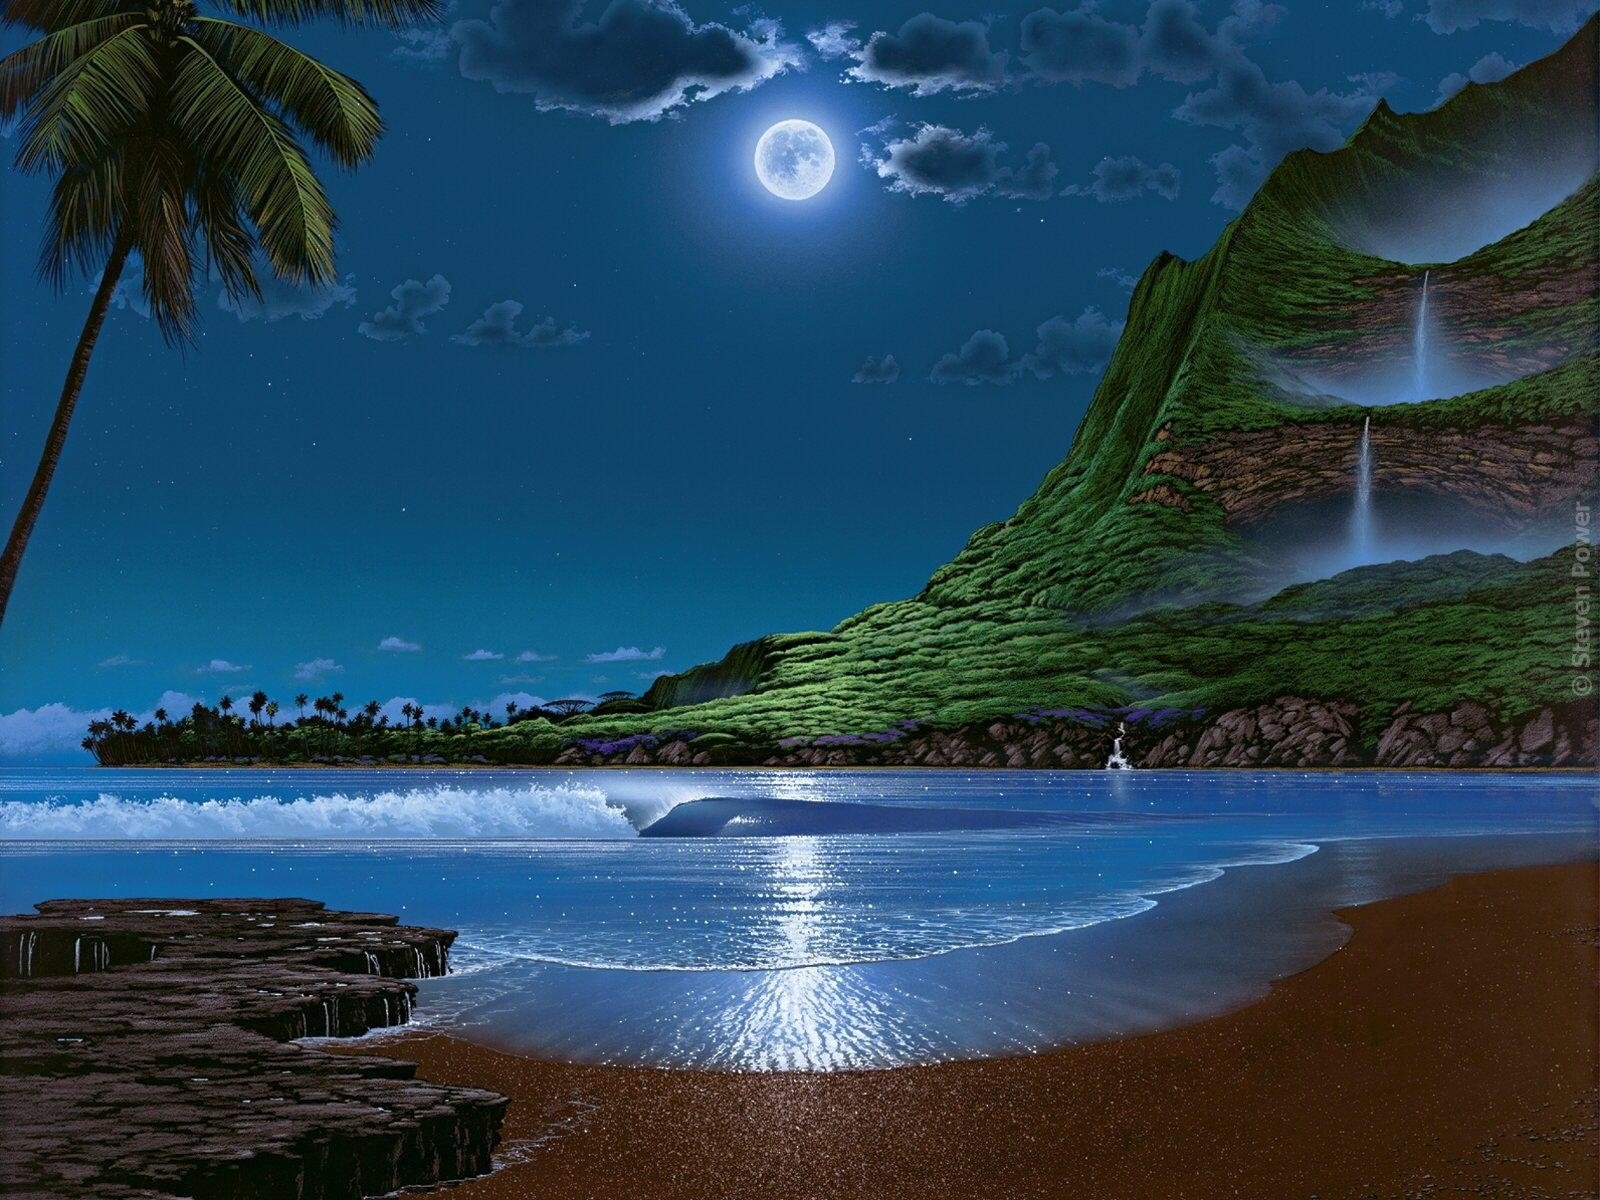 moonlit-night-at-the-sea-by-stephen-power